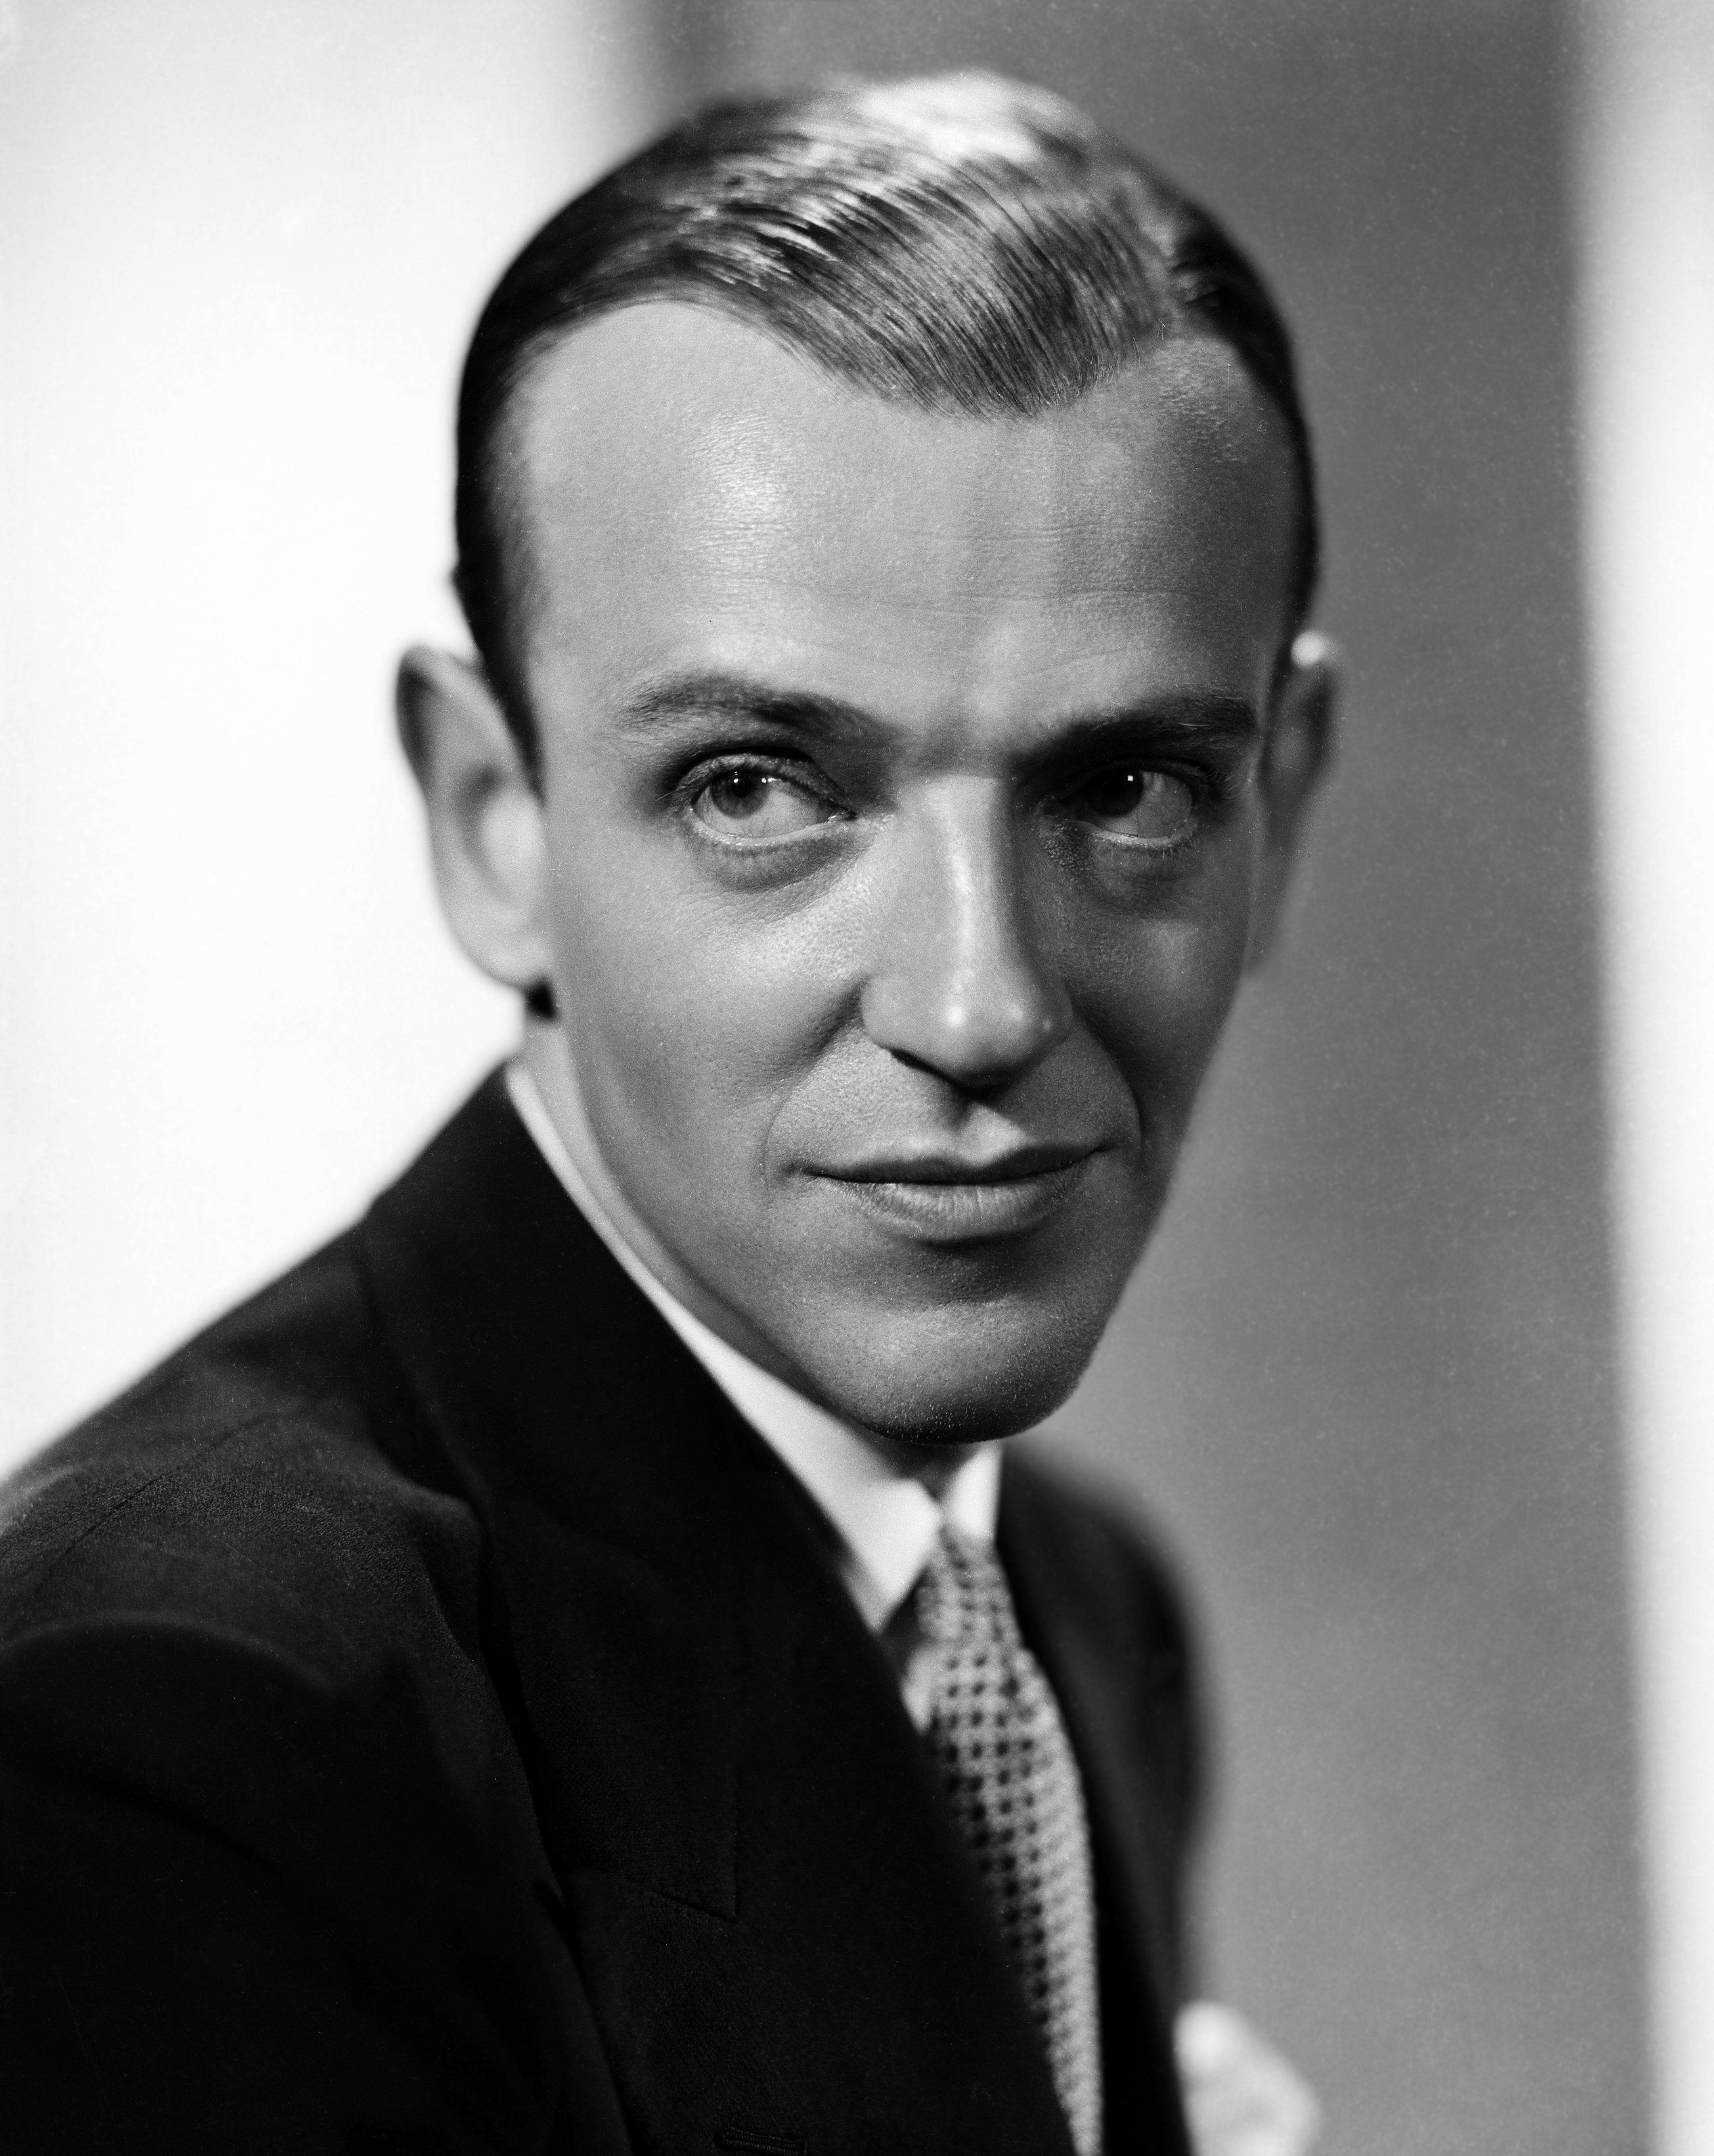 Unknown Black and White Photograph - Fred Astaire: Handsome Headshot Movie Star News Fine Art Print